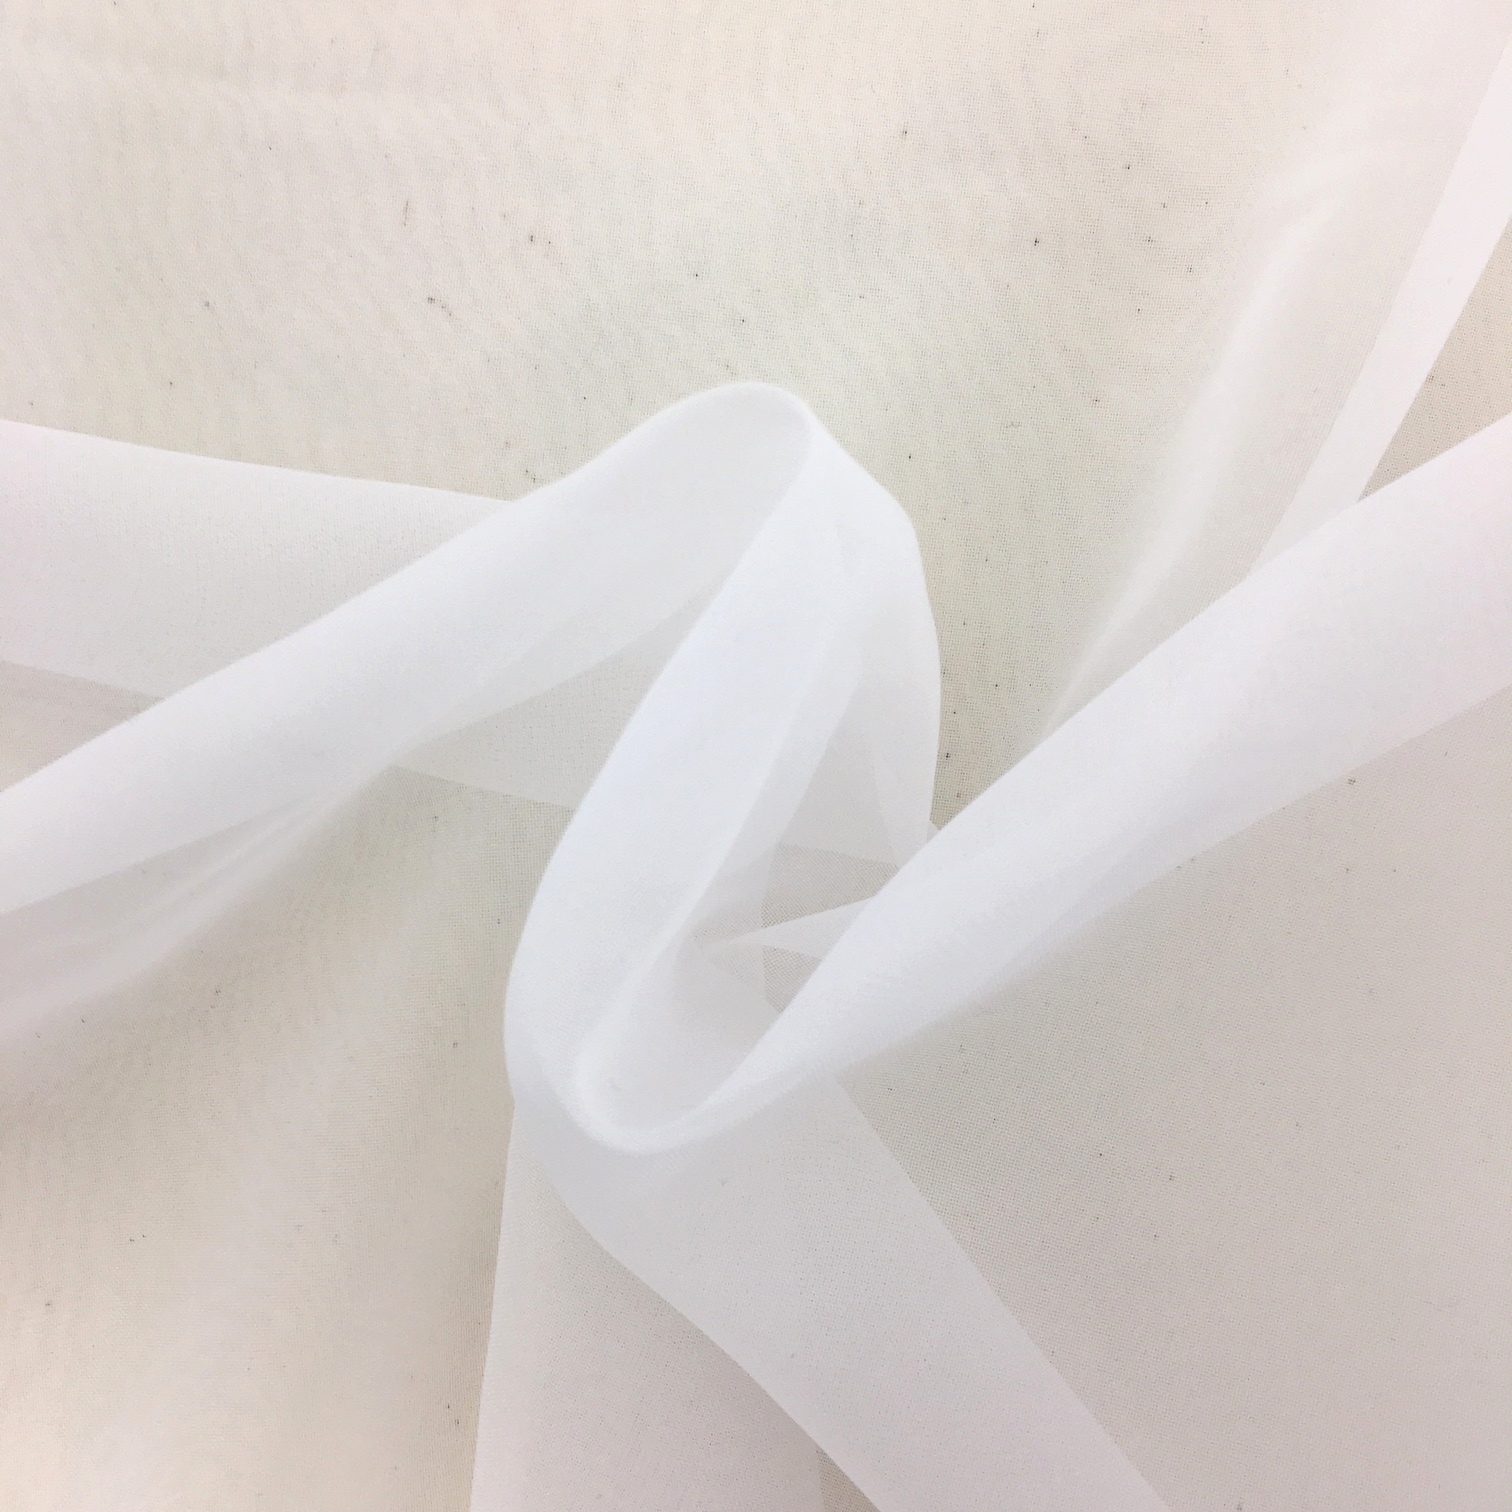 Voile Fabric | Voile Fabrics for Sale | Voile Materials | Voile Fabric UK